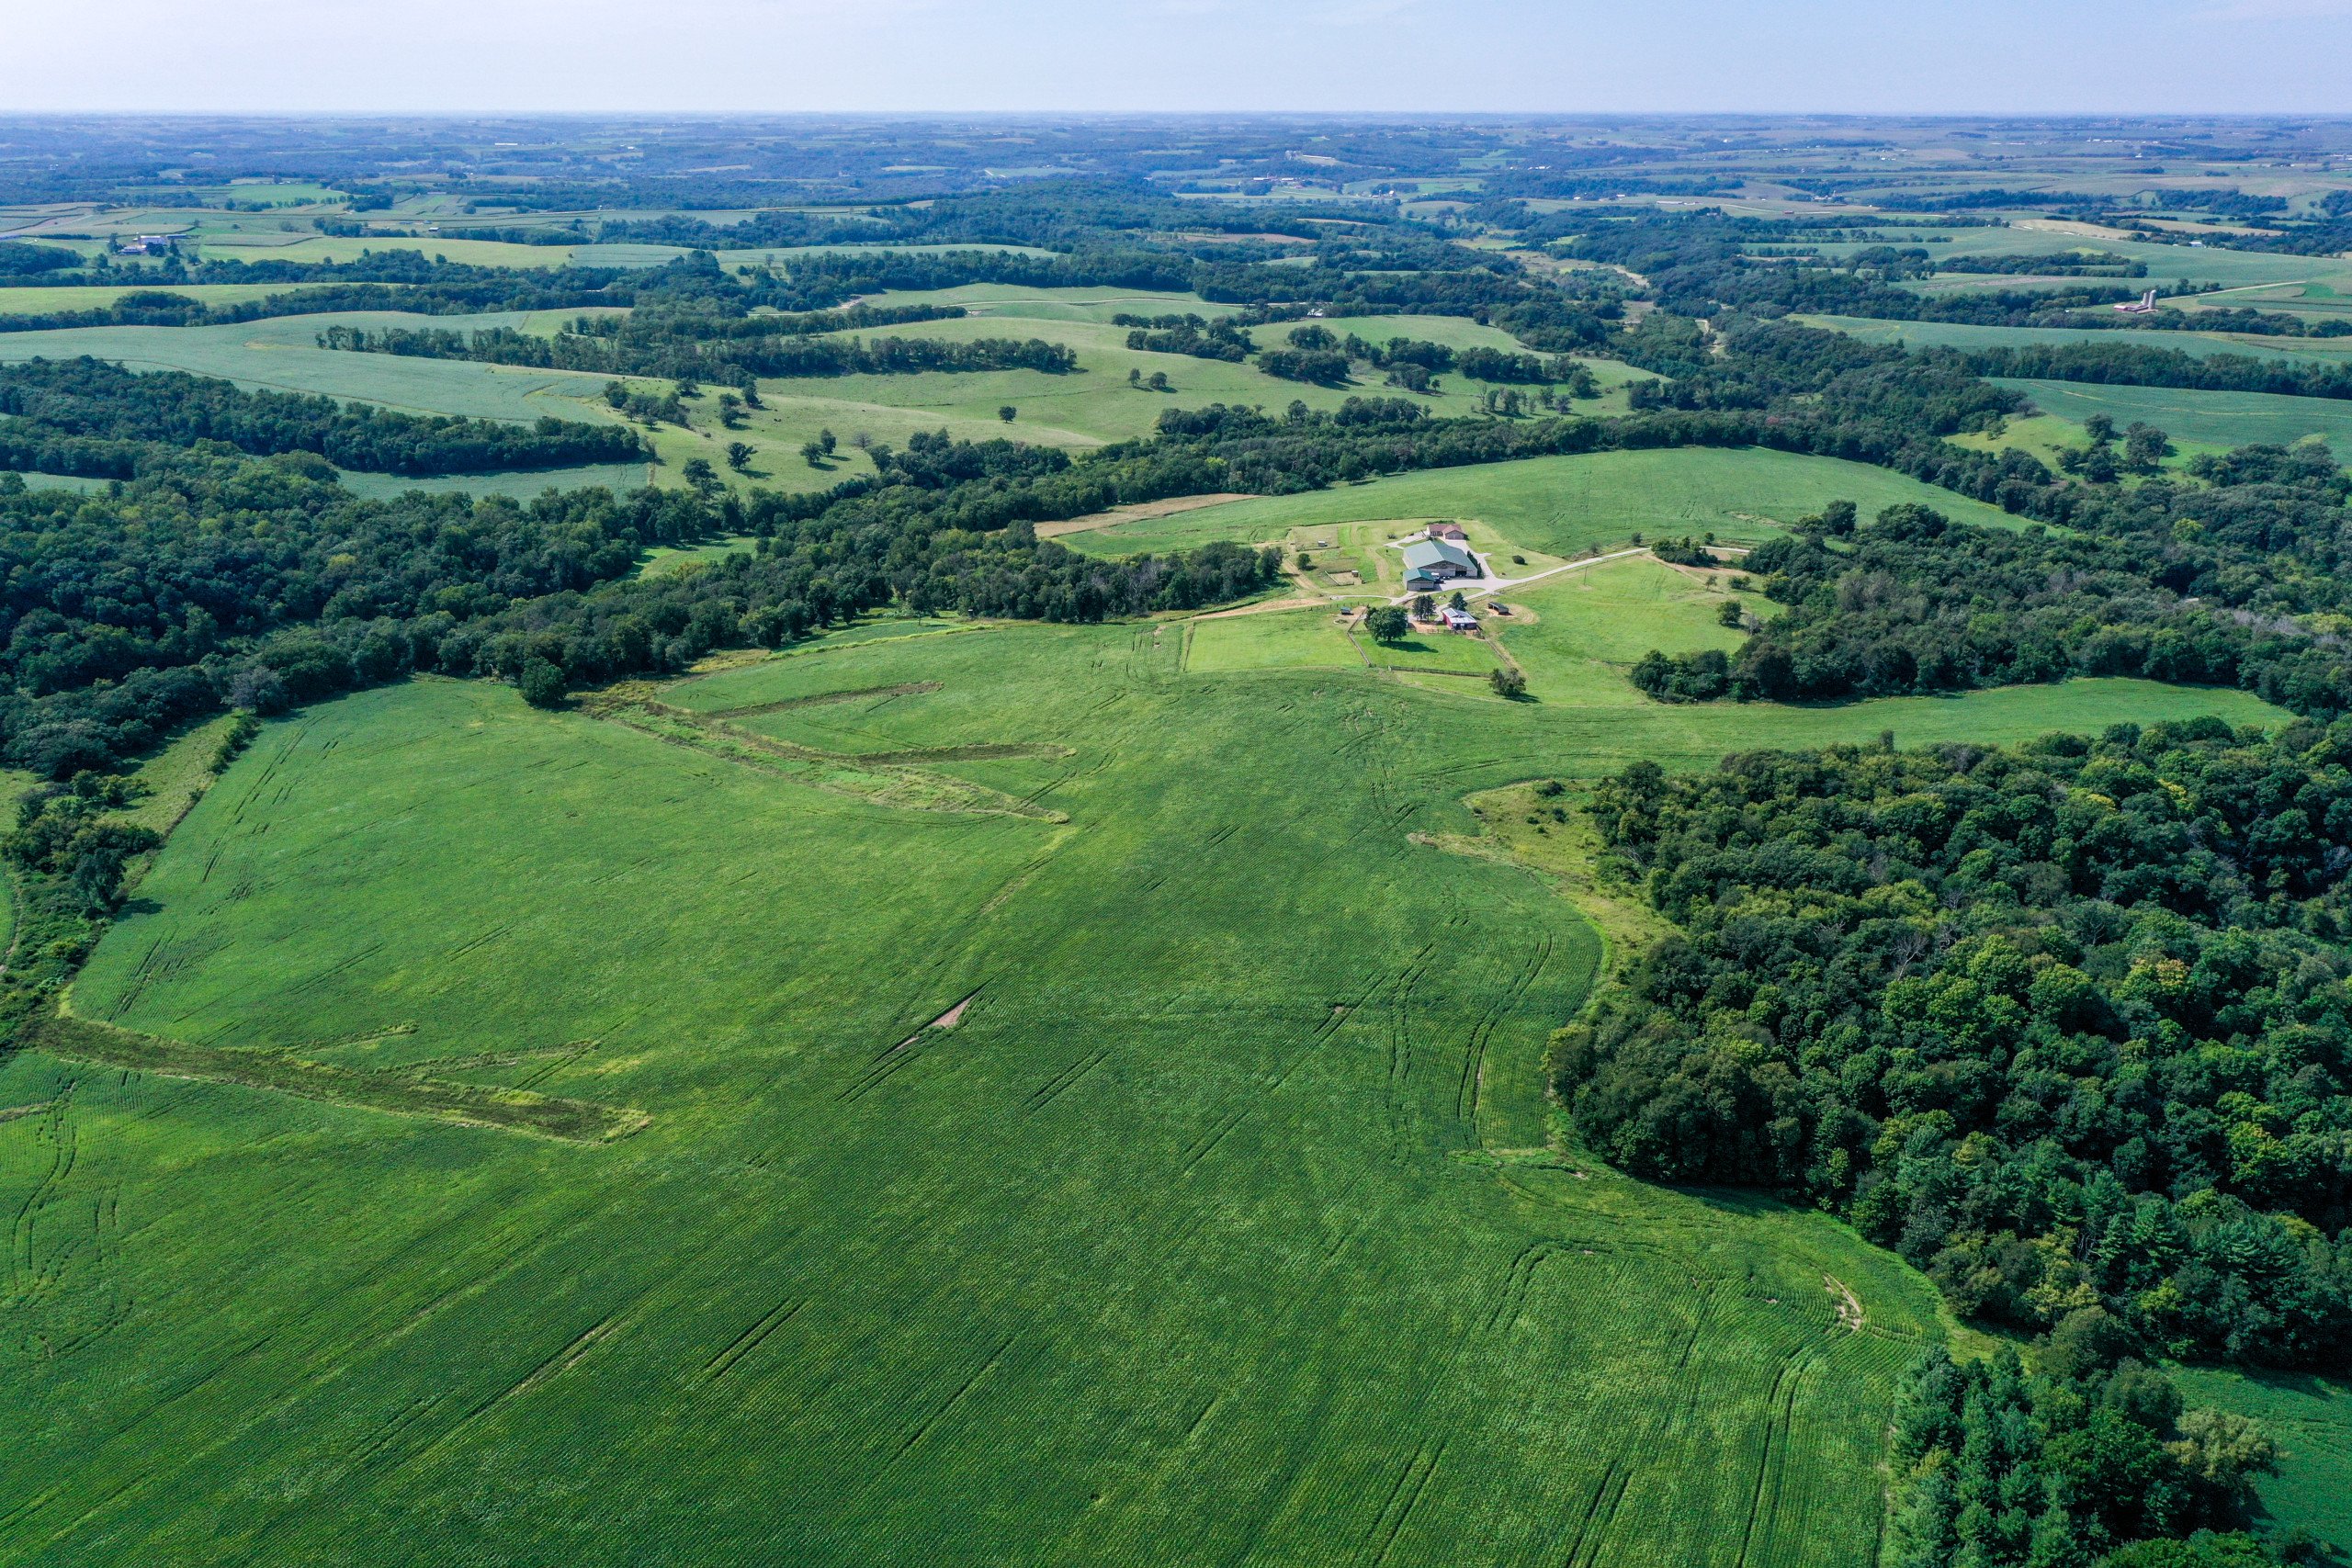 residential-land-grant-county-wisconsin-0-acres-listing-number-16393-DJI_0296-1.jpg